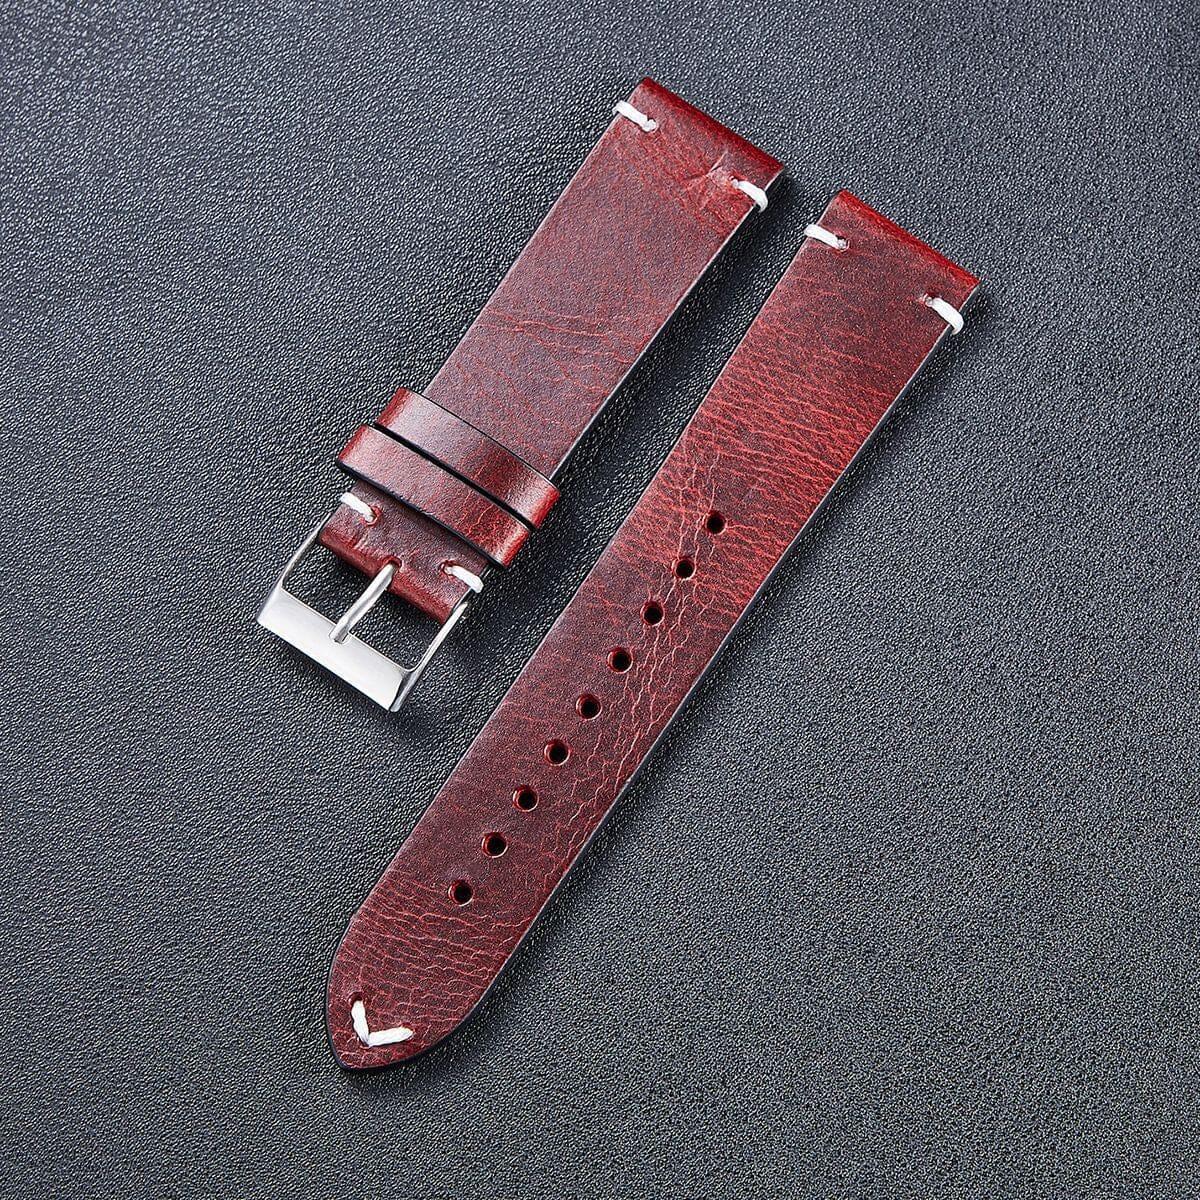 Vintage Oiled Leather Watch Straps Compatible with the Suunto 9 Peak Pro